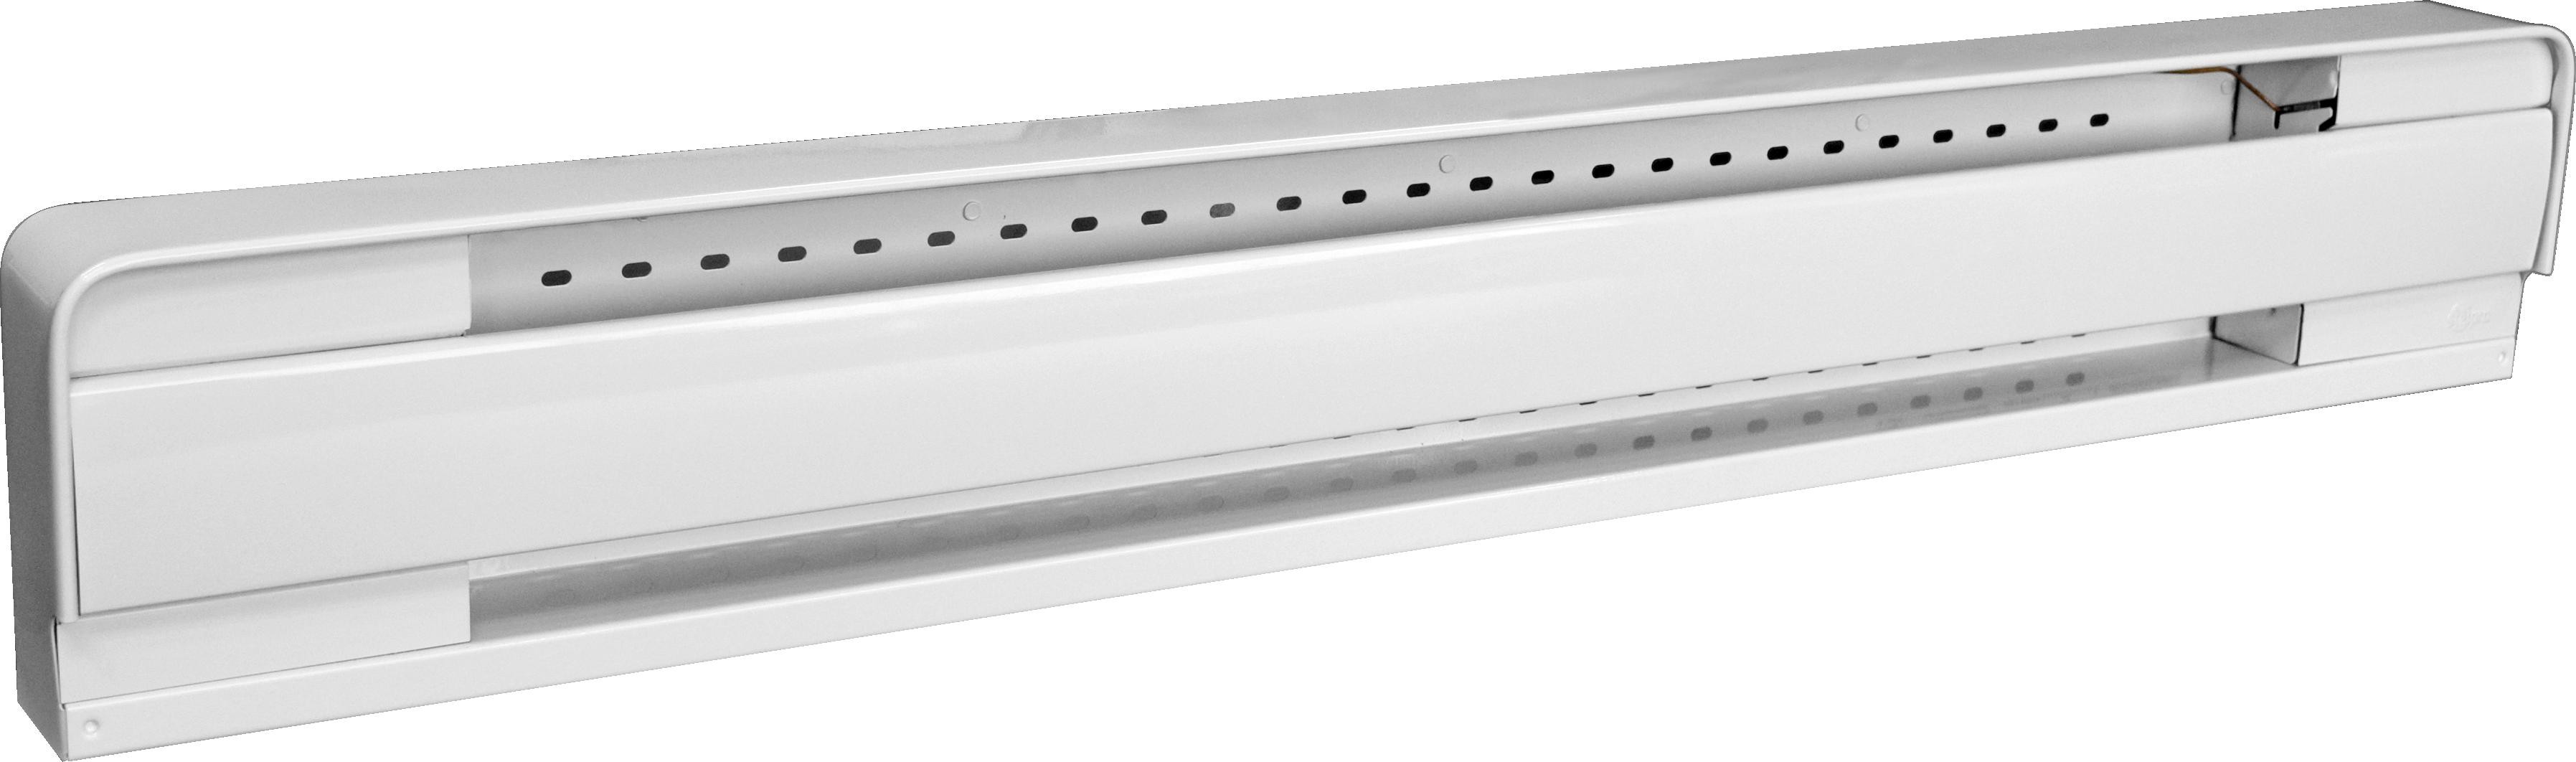 ELECTRIC BASEBOARD HEATER WALL MOUNT  30" White Room Radiant Heat  500W  120V 